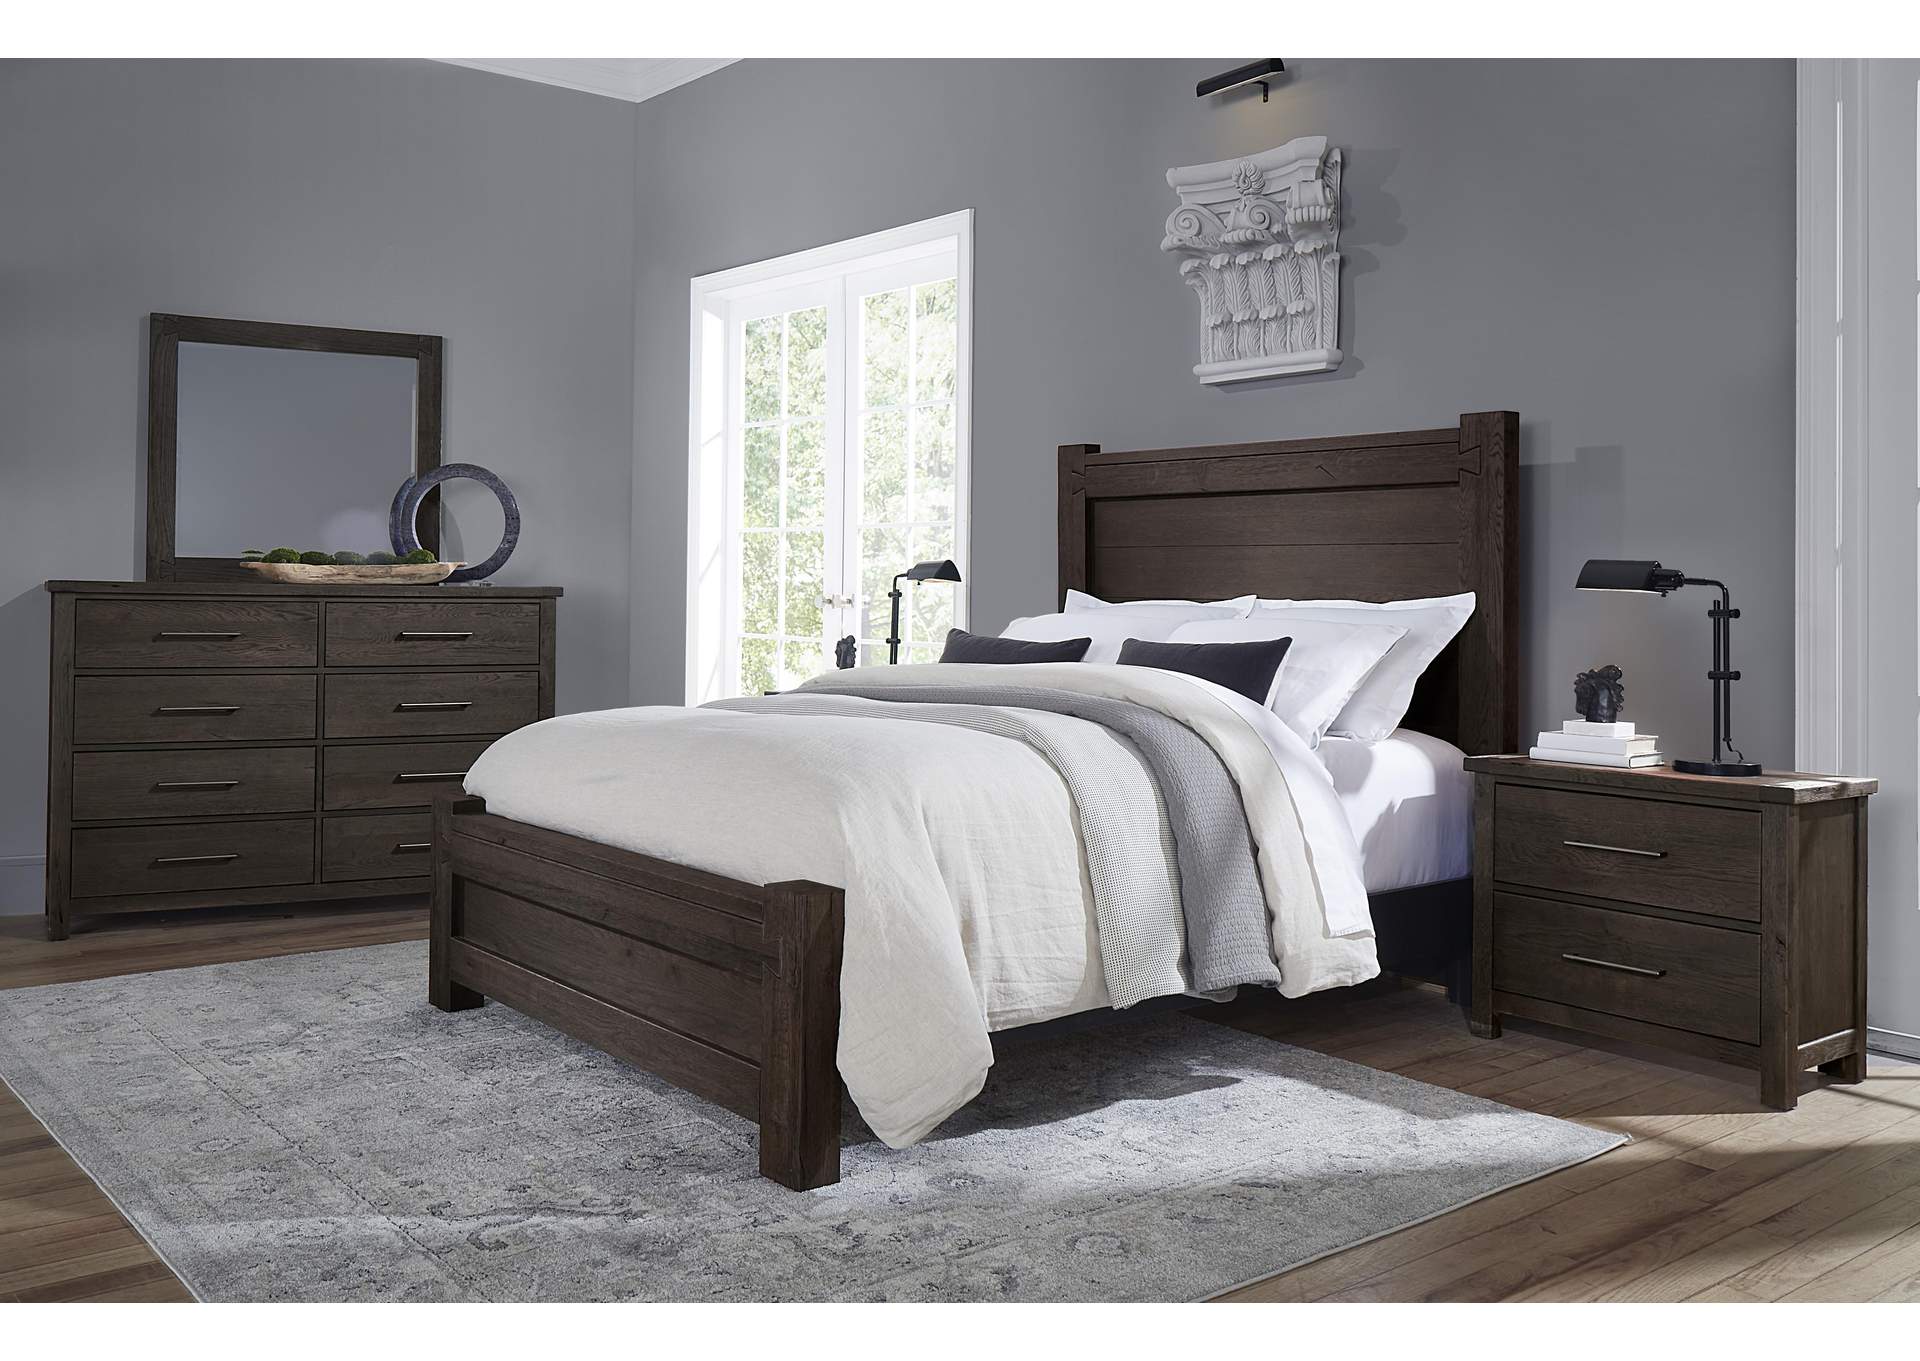 750 - Dovetail-Java Cal King Poster Bed With Poster Fb,Vaughan-Bassett